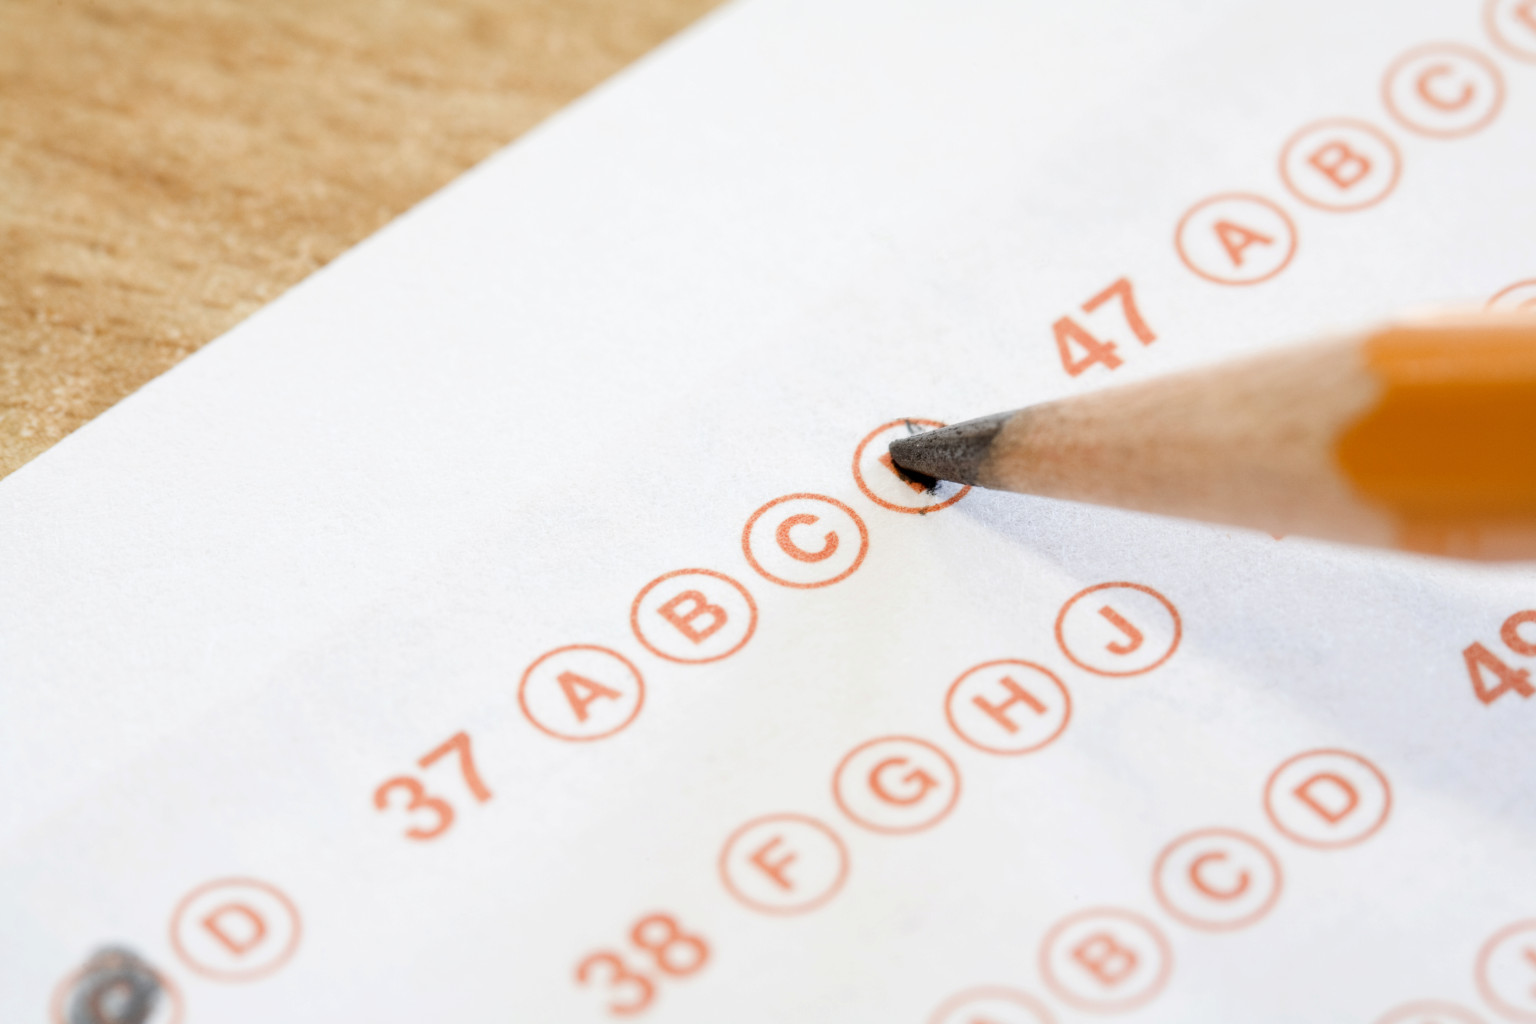 The Value of Standardized Testing